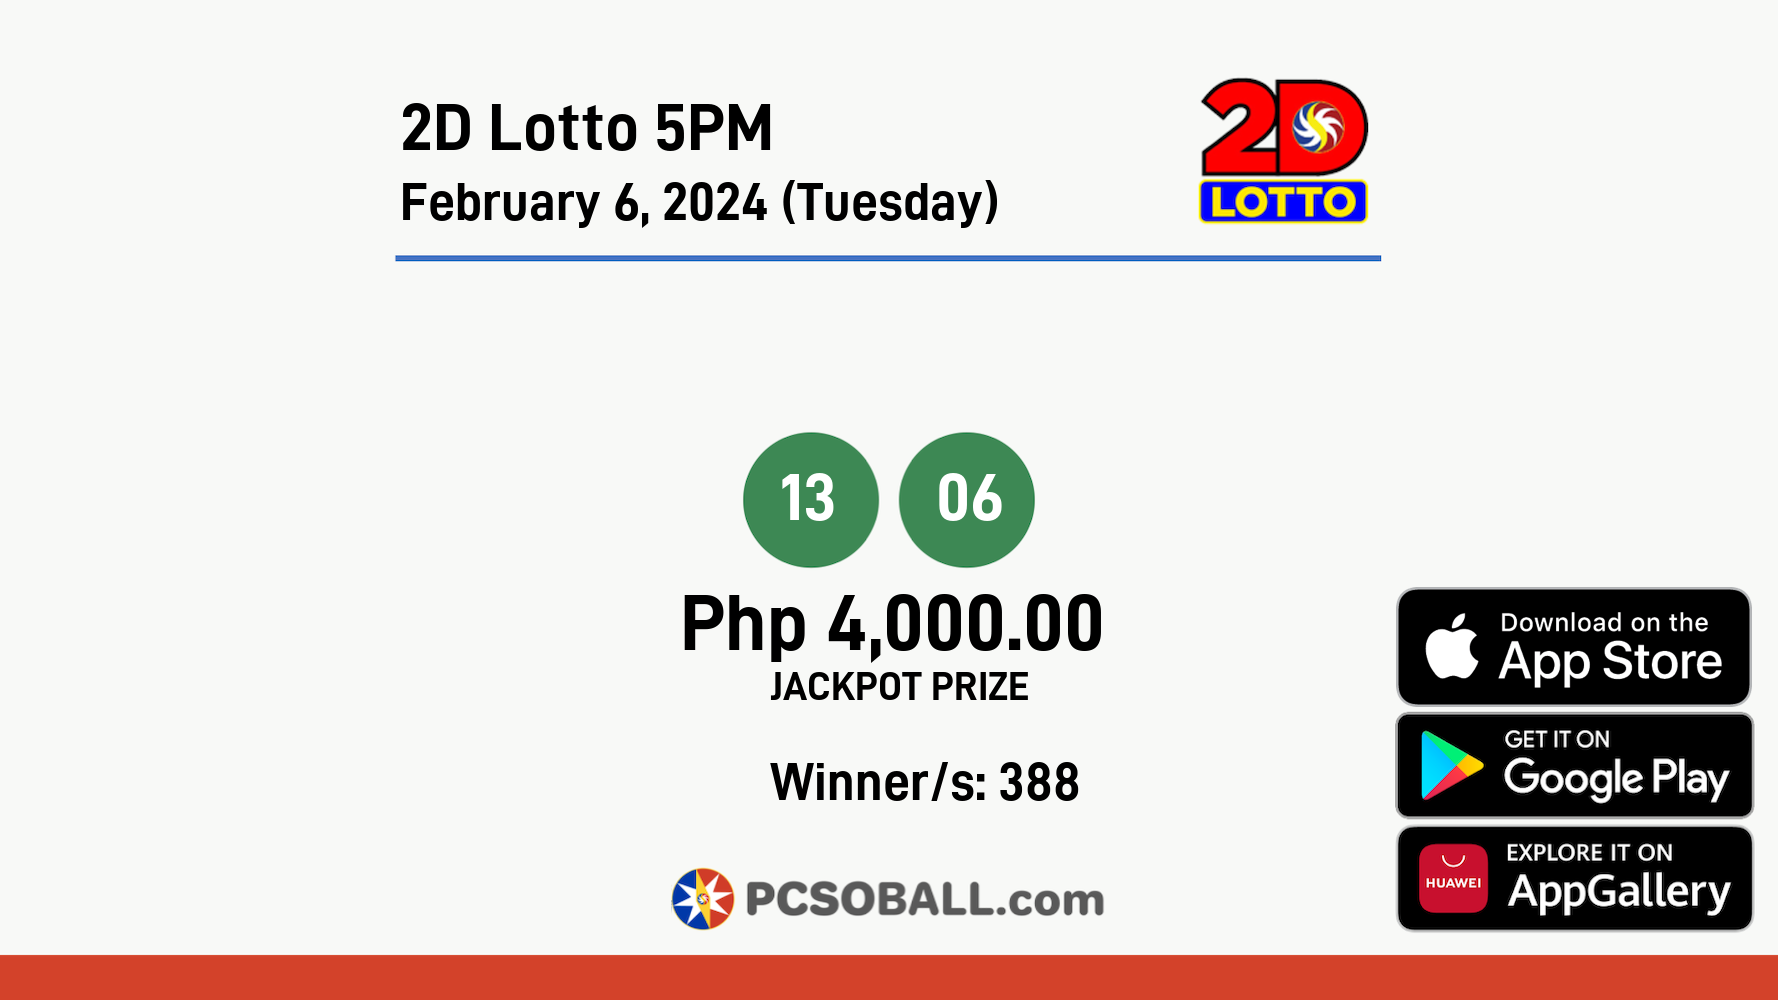 2D Lotto 5PM February 6, 2024 (Tuesday) Result